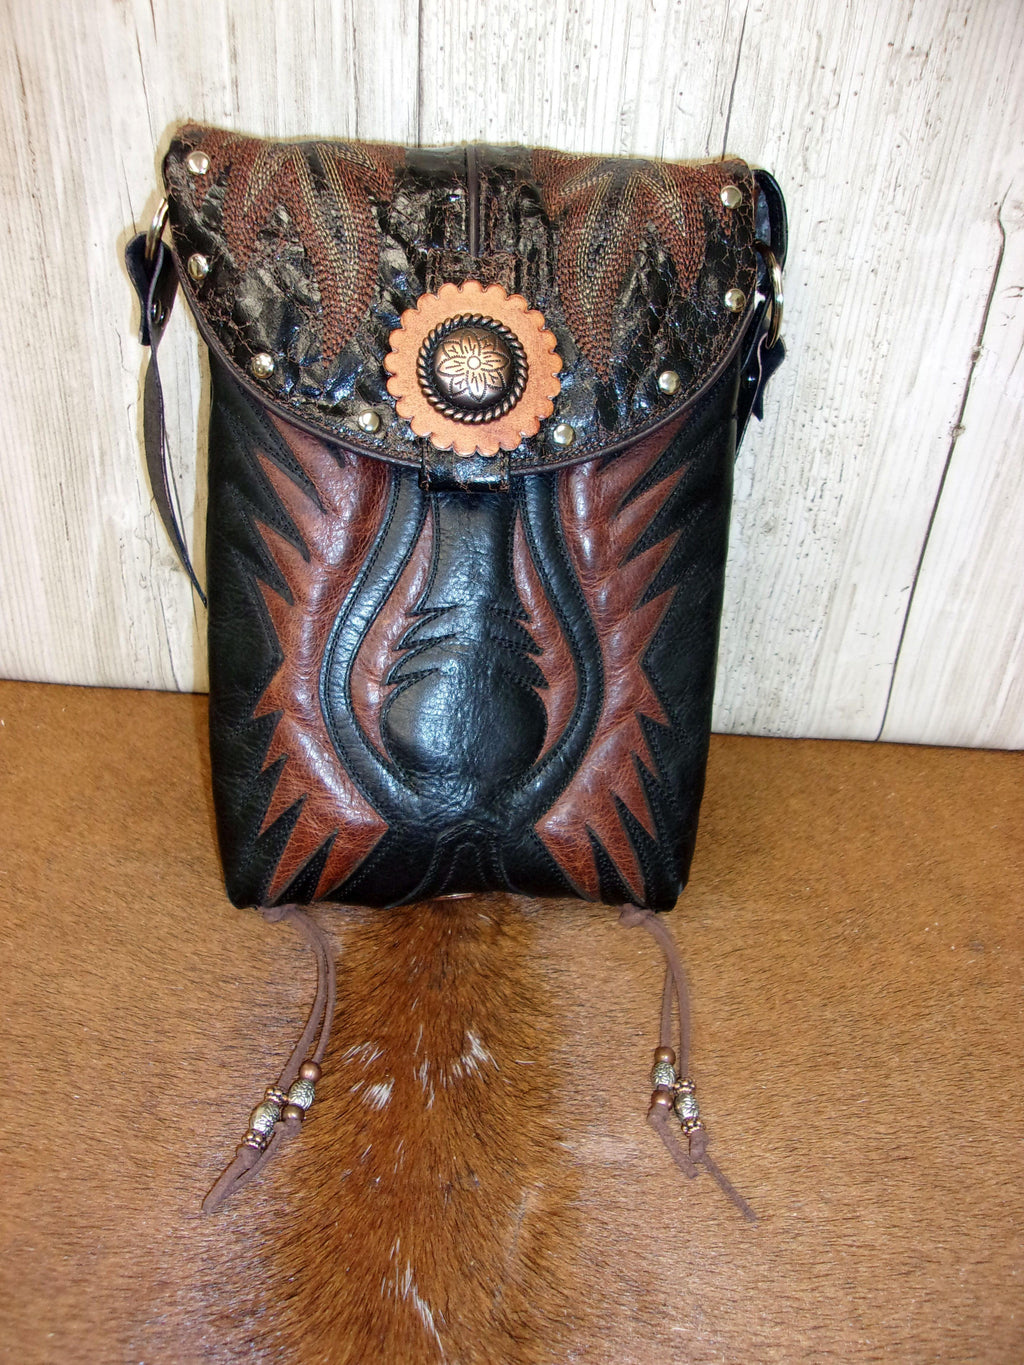 Cowboy Boot Concealed Carry Purse - Crossbody Conceal Carry Purse CB156 cowboy boot purses, western fringe purse, handmade leather purses, boot purse, handmade western purse, custom leather handbags Chris Thompson Bags